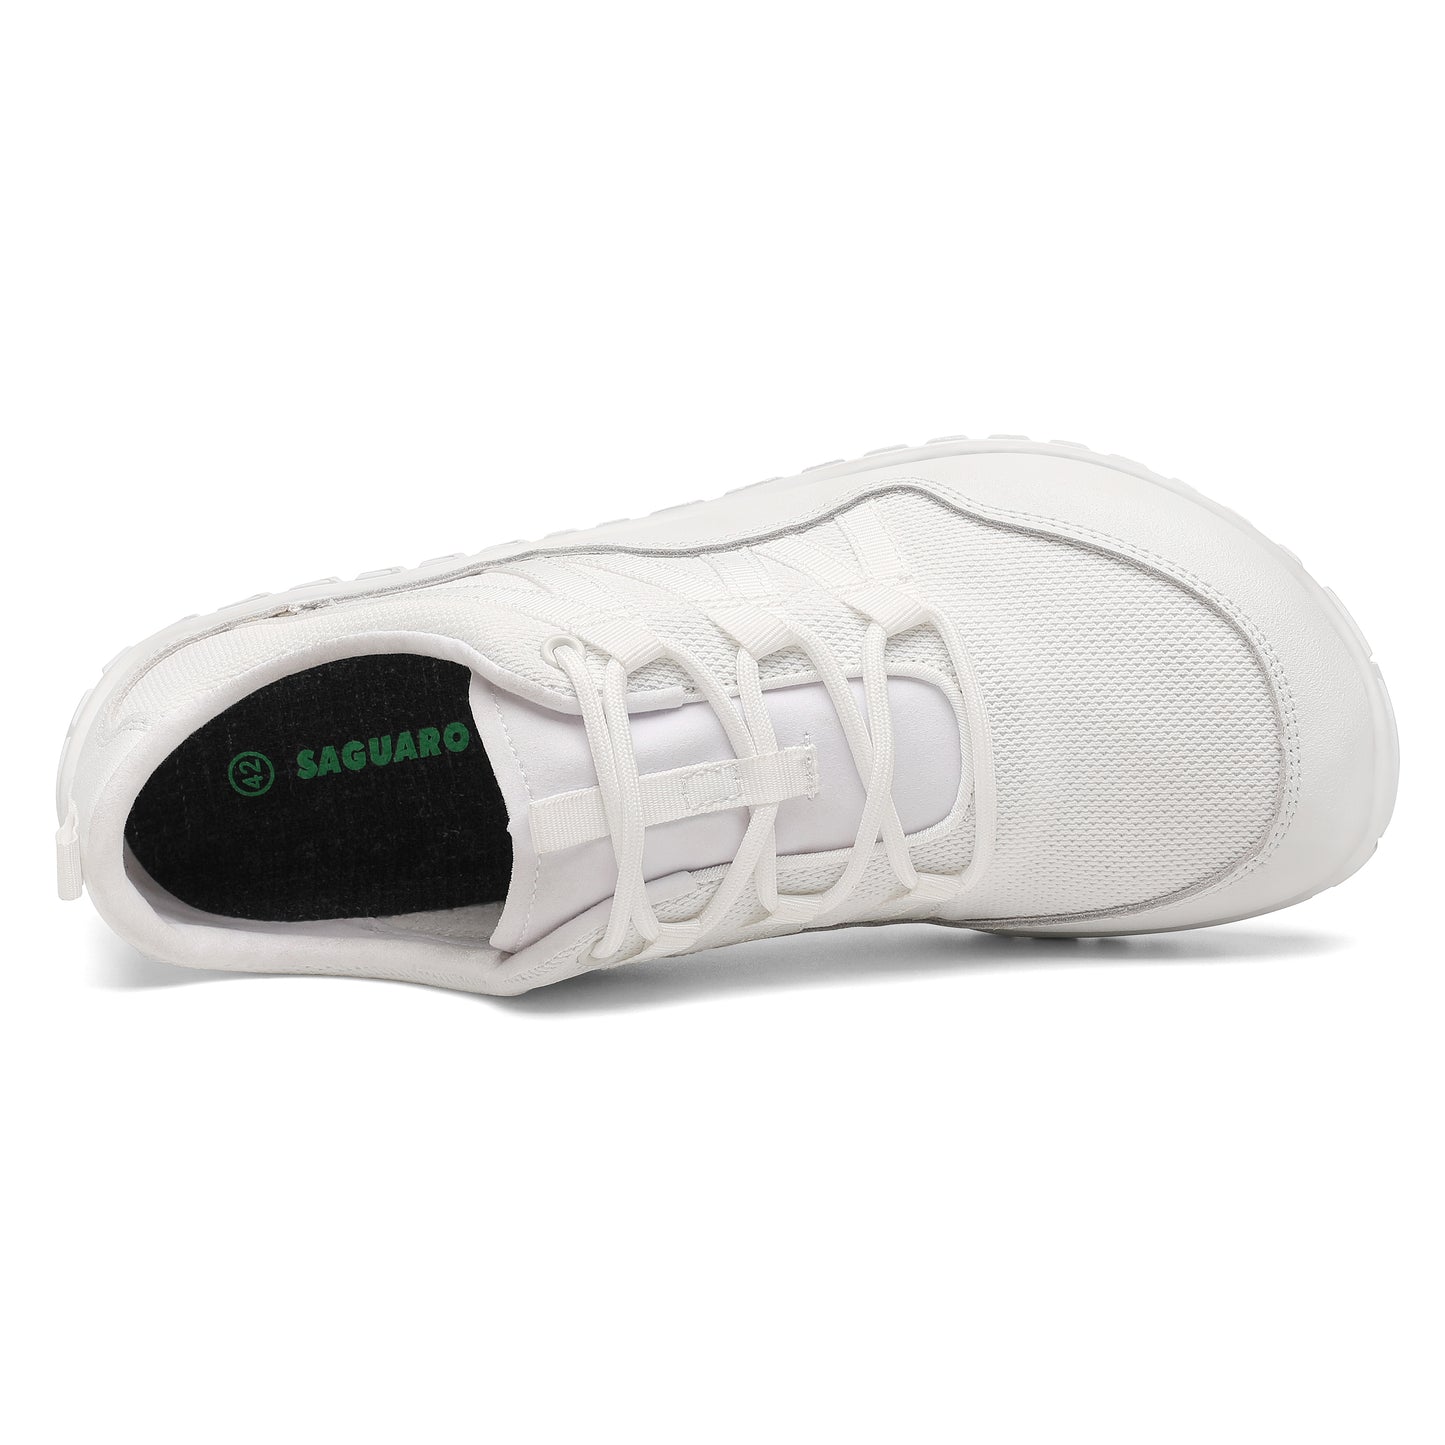 Forestep I - Blanco - Barefoot shoes